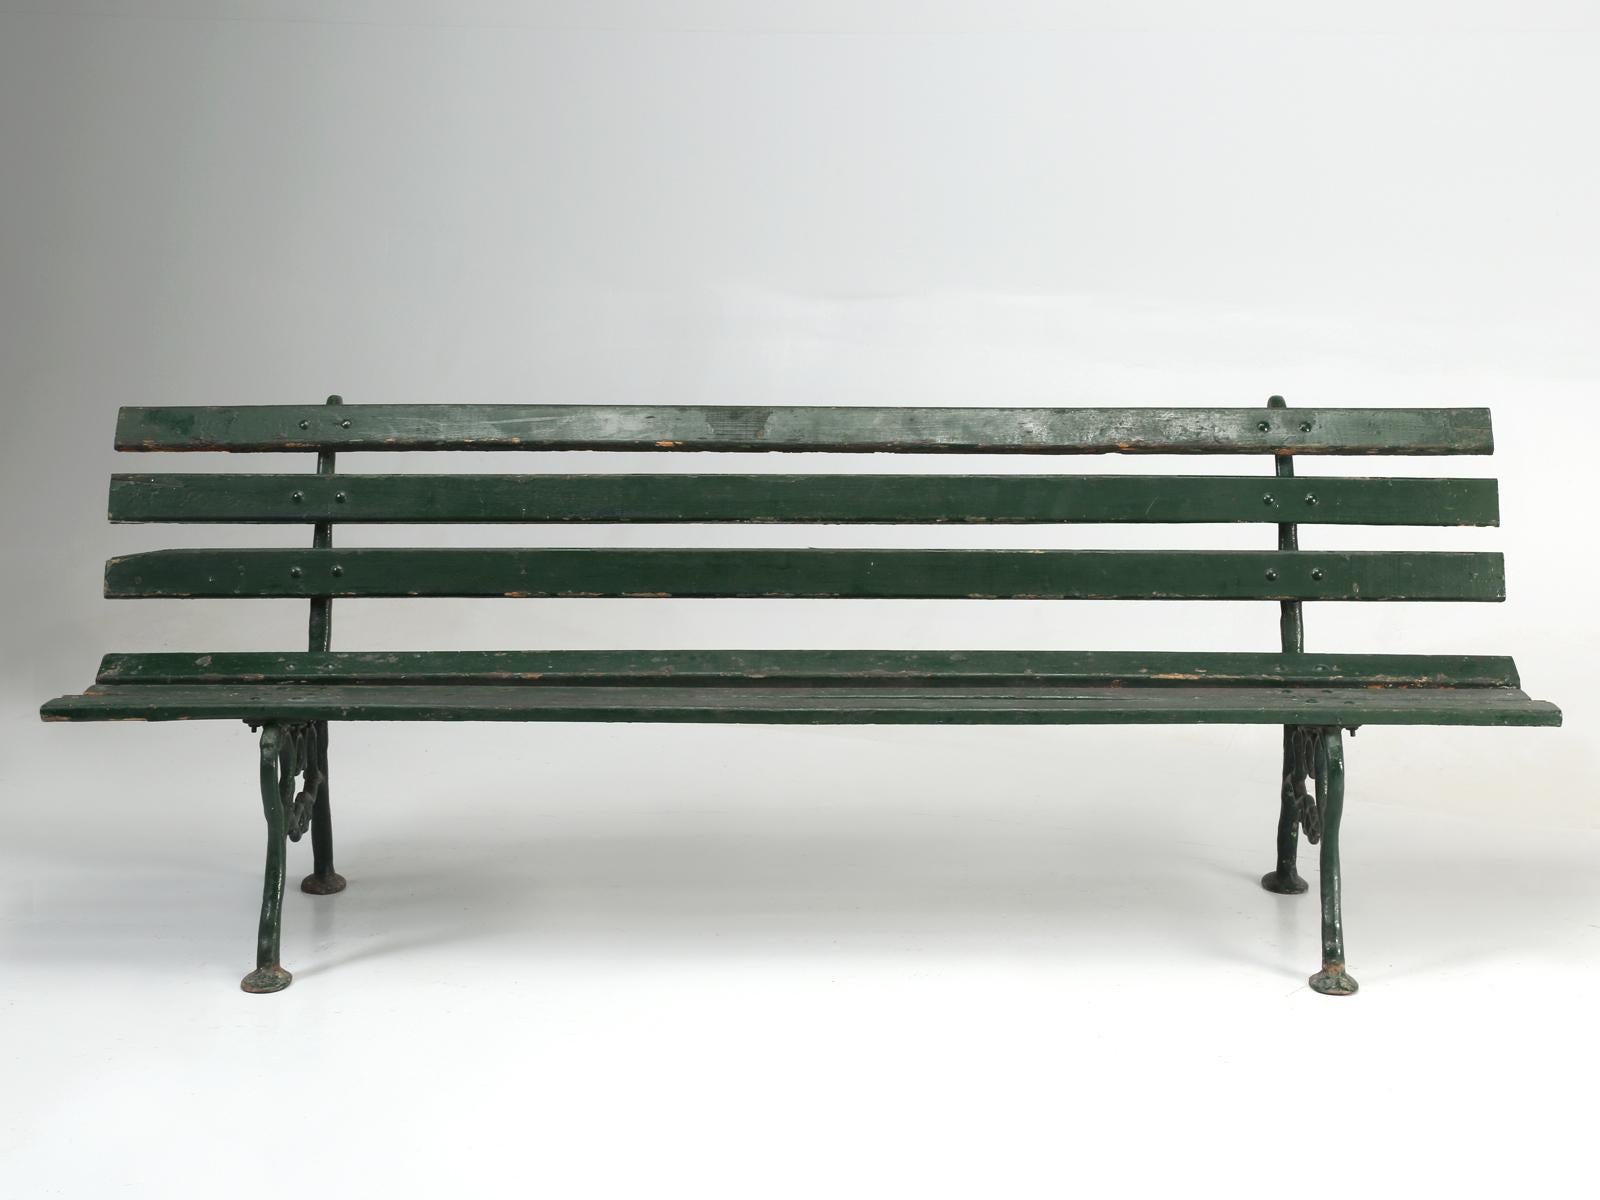 Antique French cast iron and wood garden bench in old paint. Structurally very sound and you can see years of green paint layered up and non-too frequently I might add.